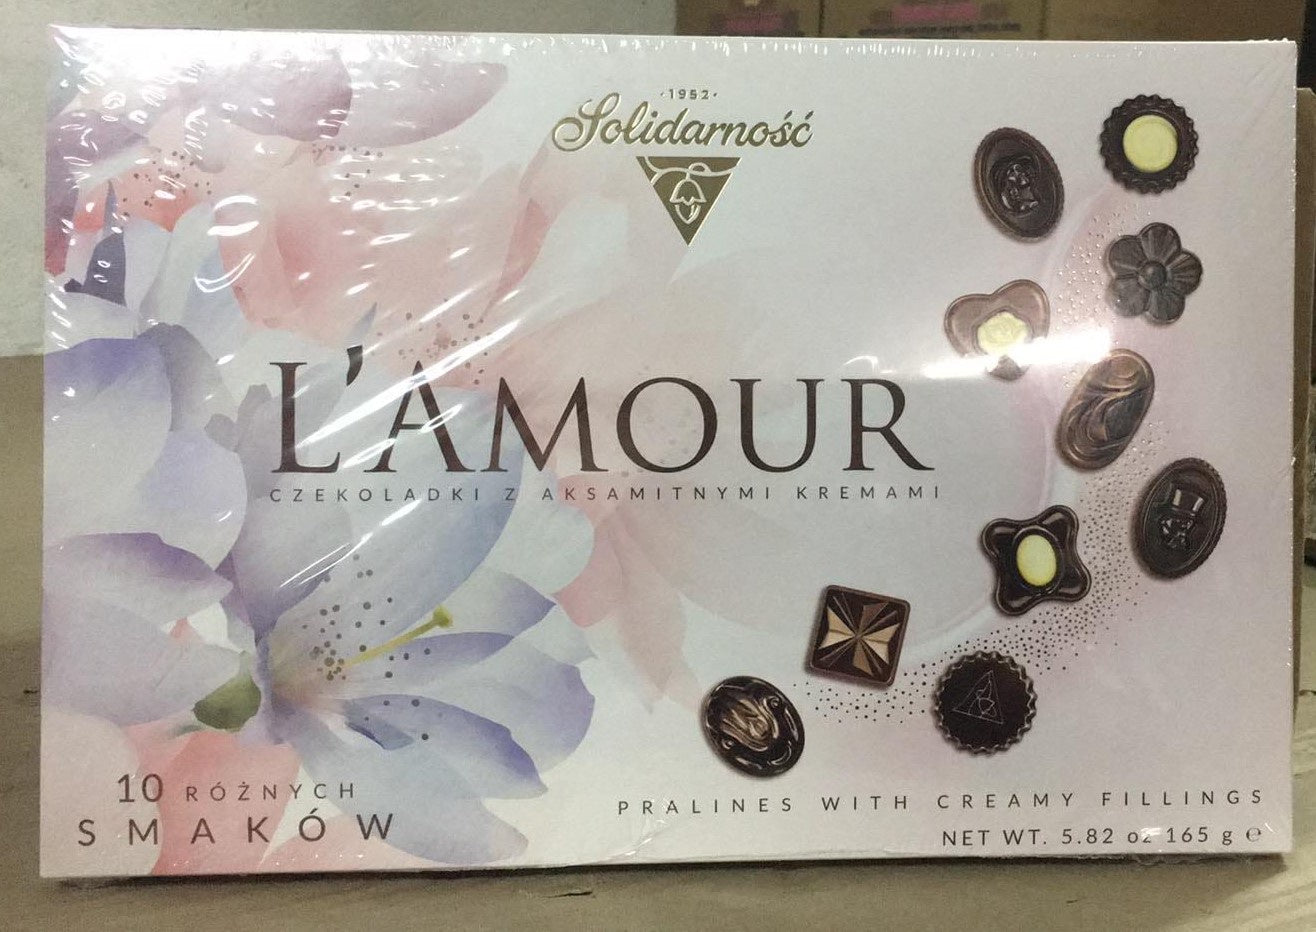 L'AMOUR Pralines w/ Creamy Filling